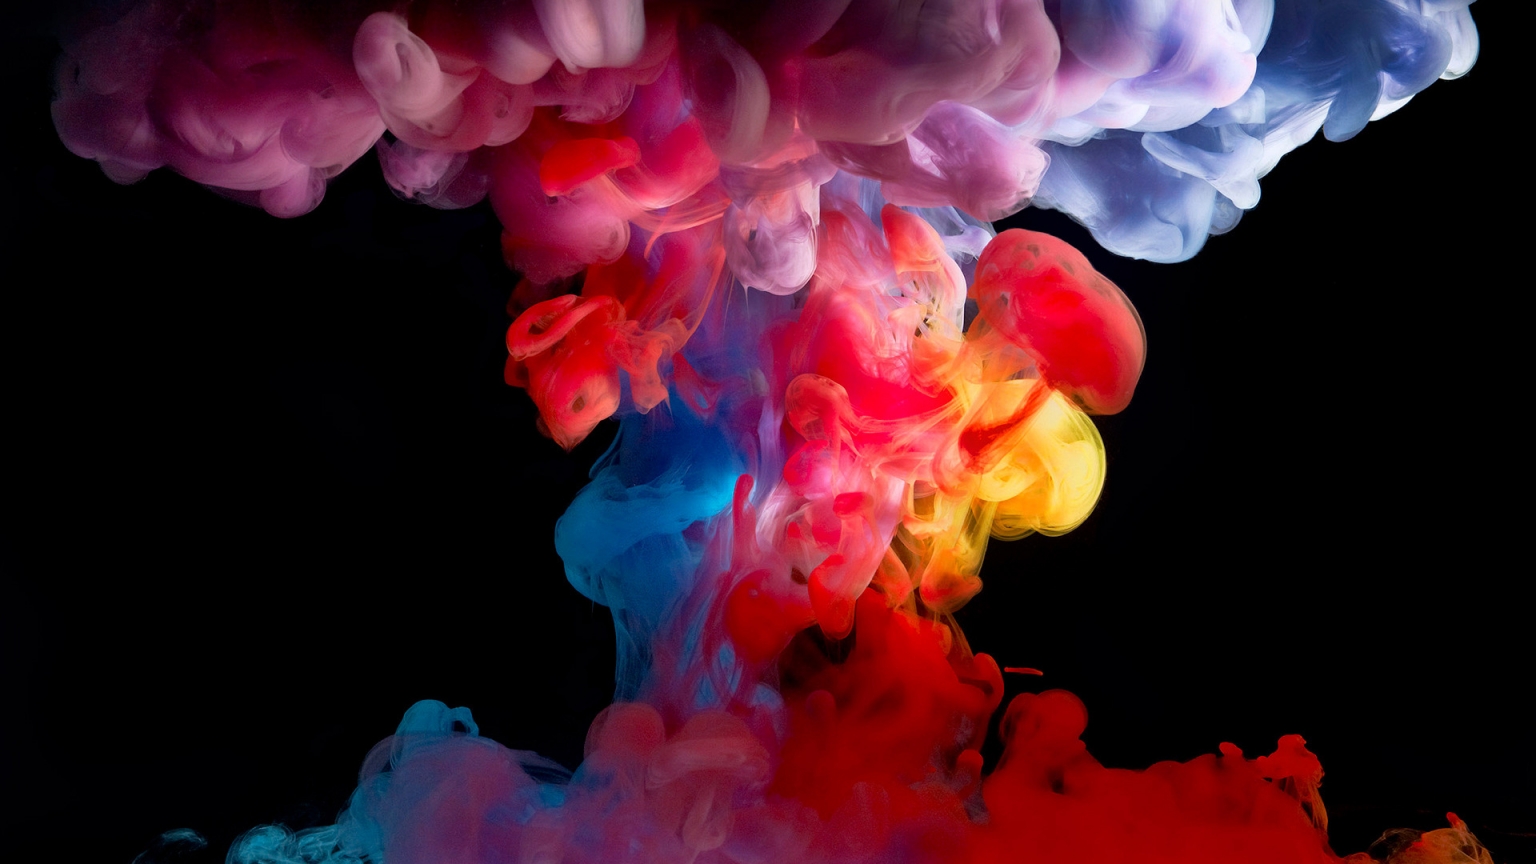 Colored Smoke Paint for 1536 x 864 HDTV resolution